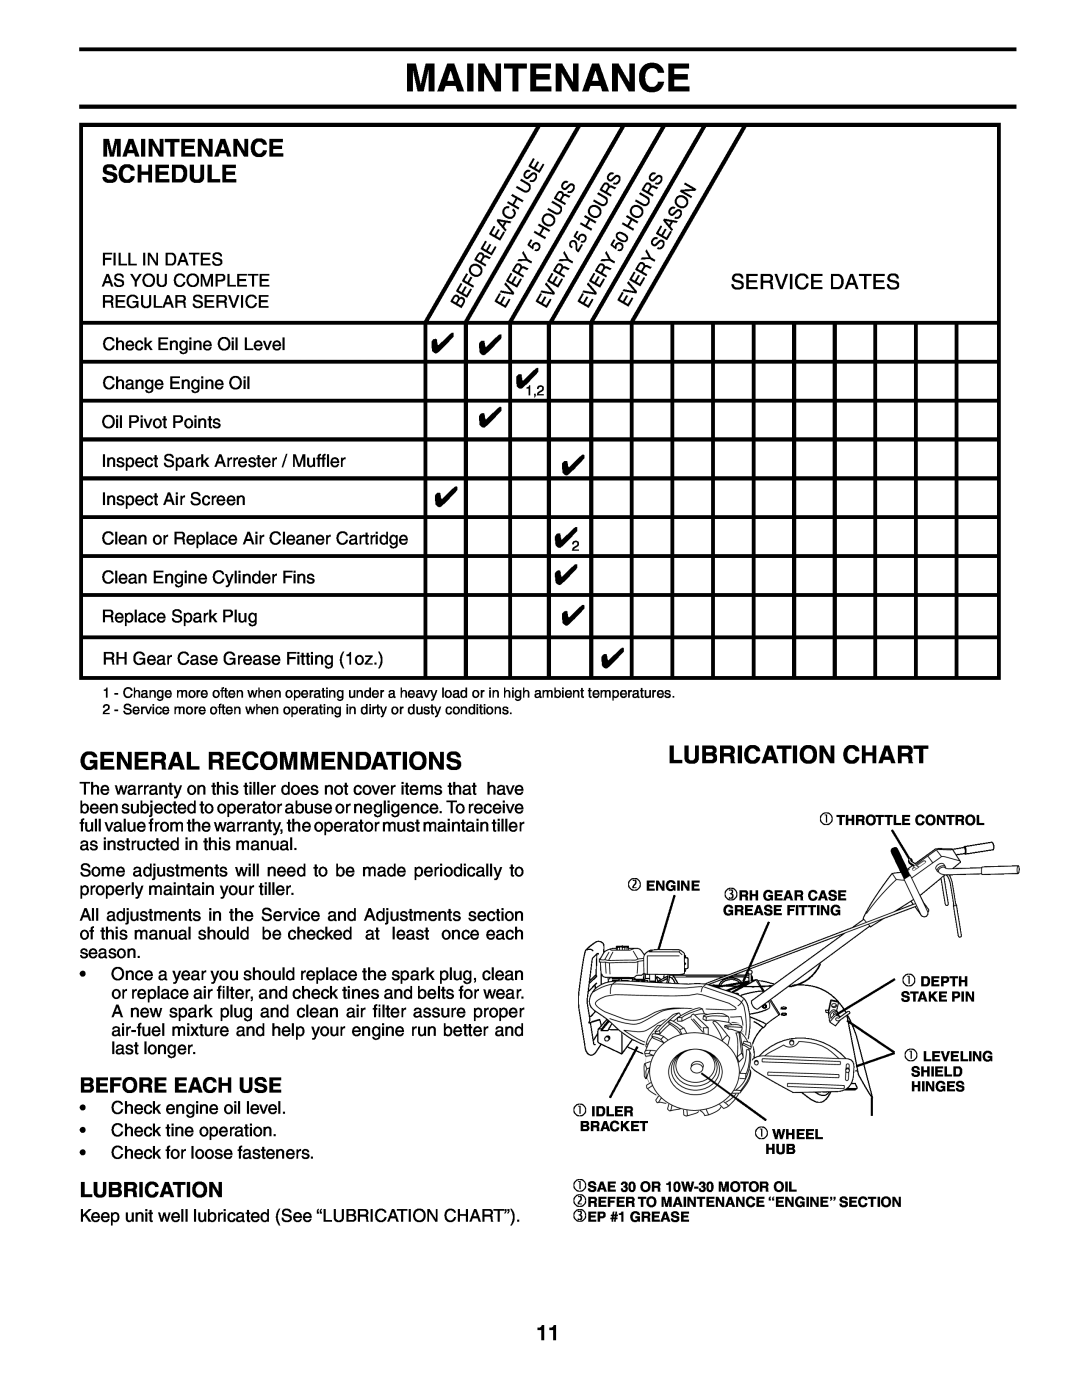 Poulan PRRT65C Maintenance Schedule, General Recommendations, Lubrication Chart, Before Each Use, Service Dates 